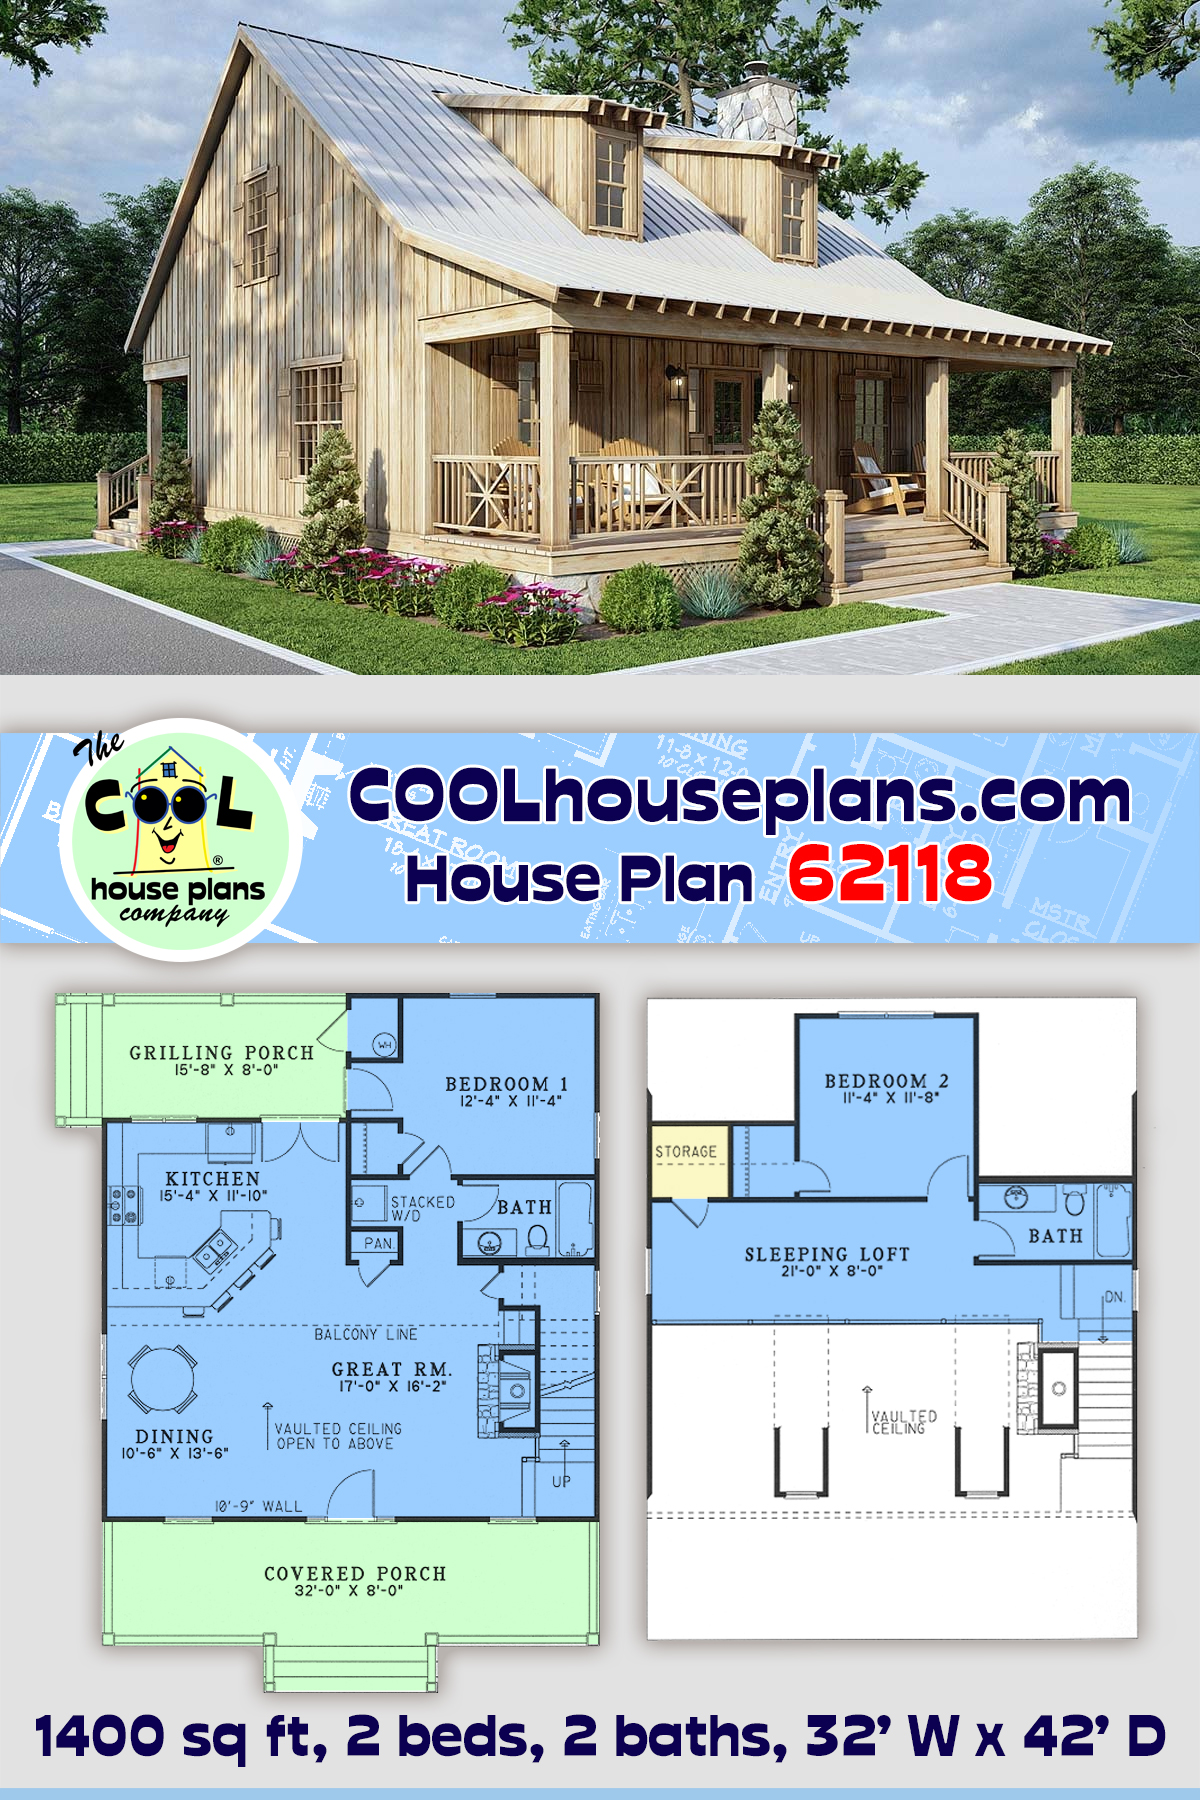 Cabin, Country, Southern House Plan 62118 with 2 Beds, 2 Baths